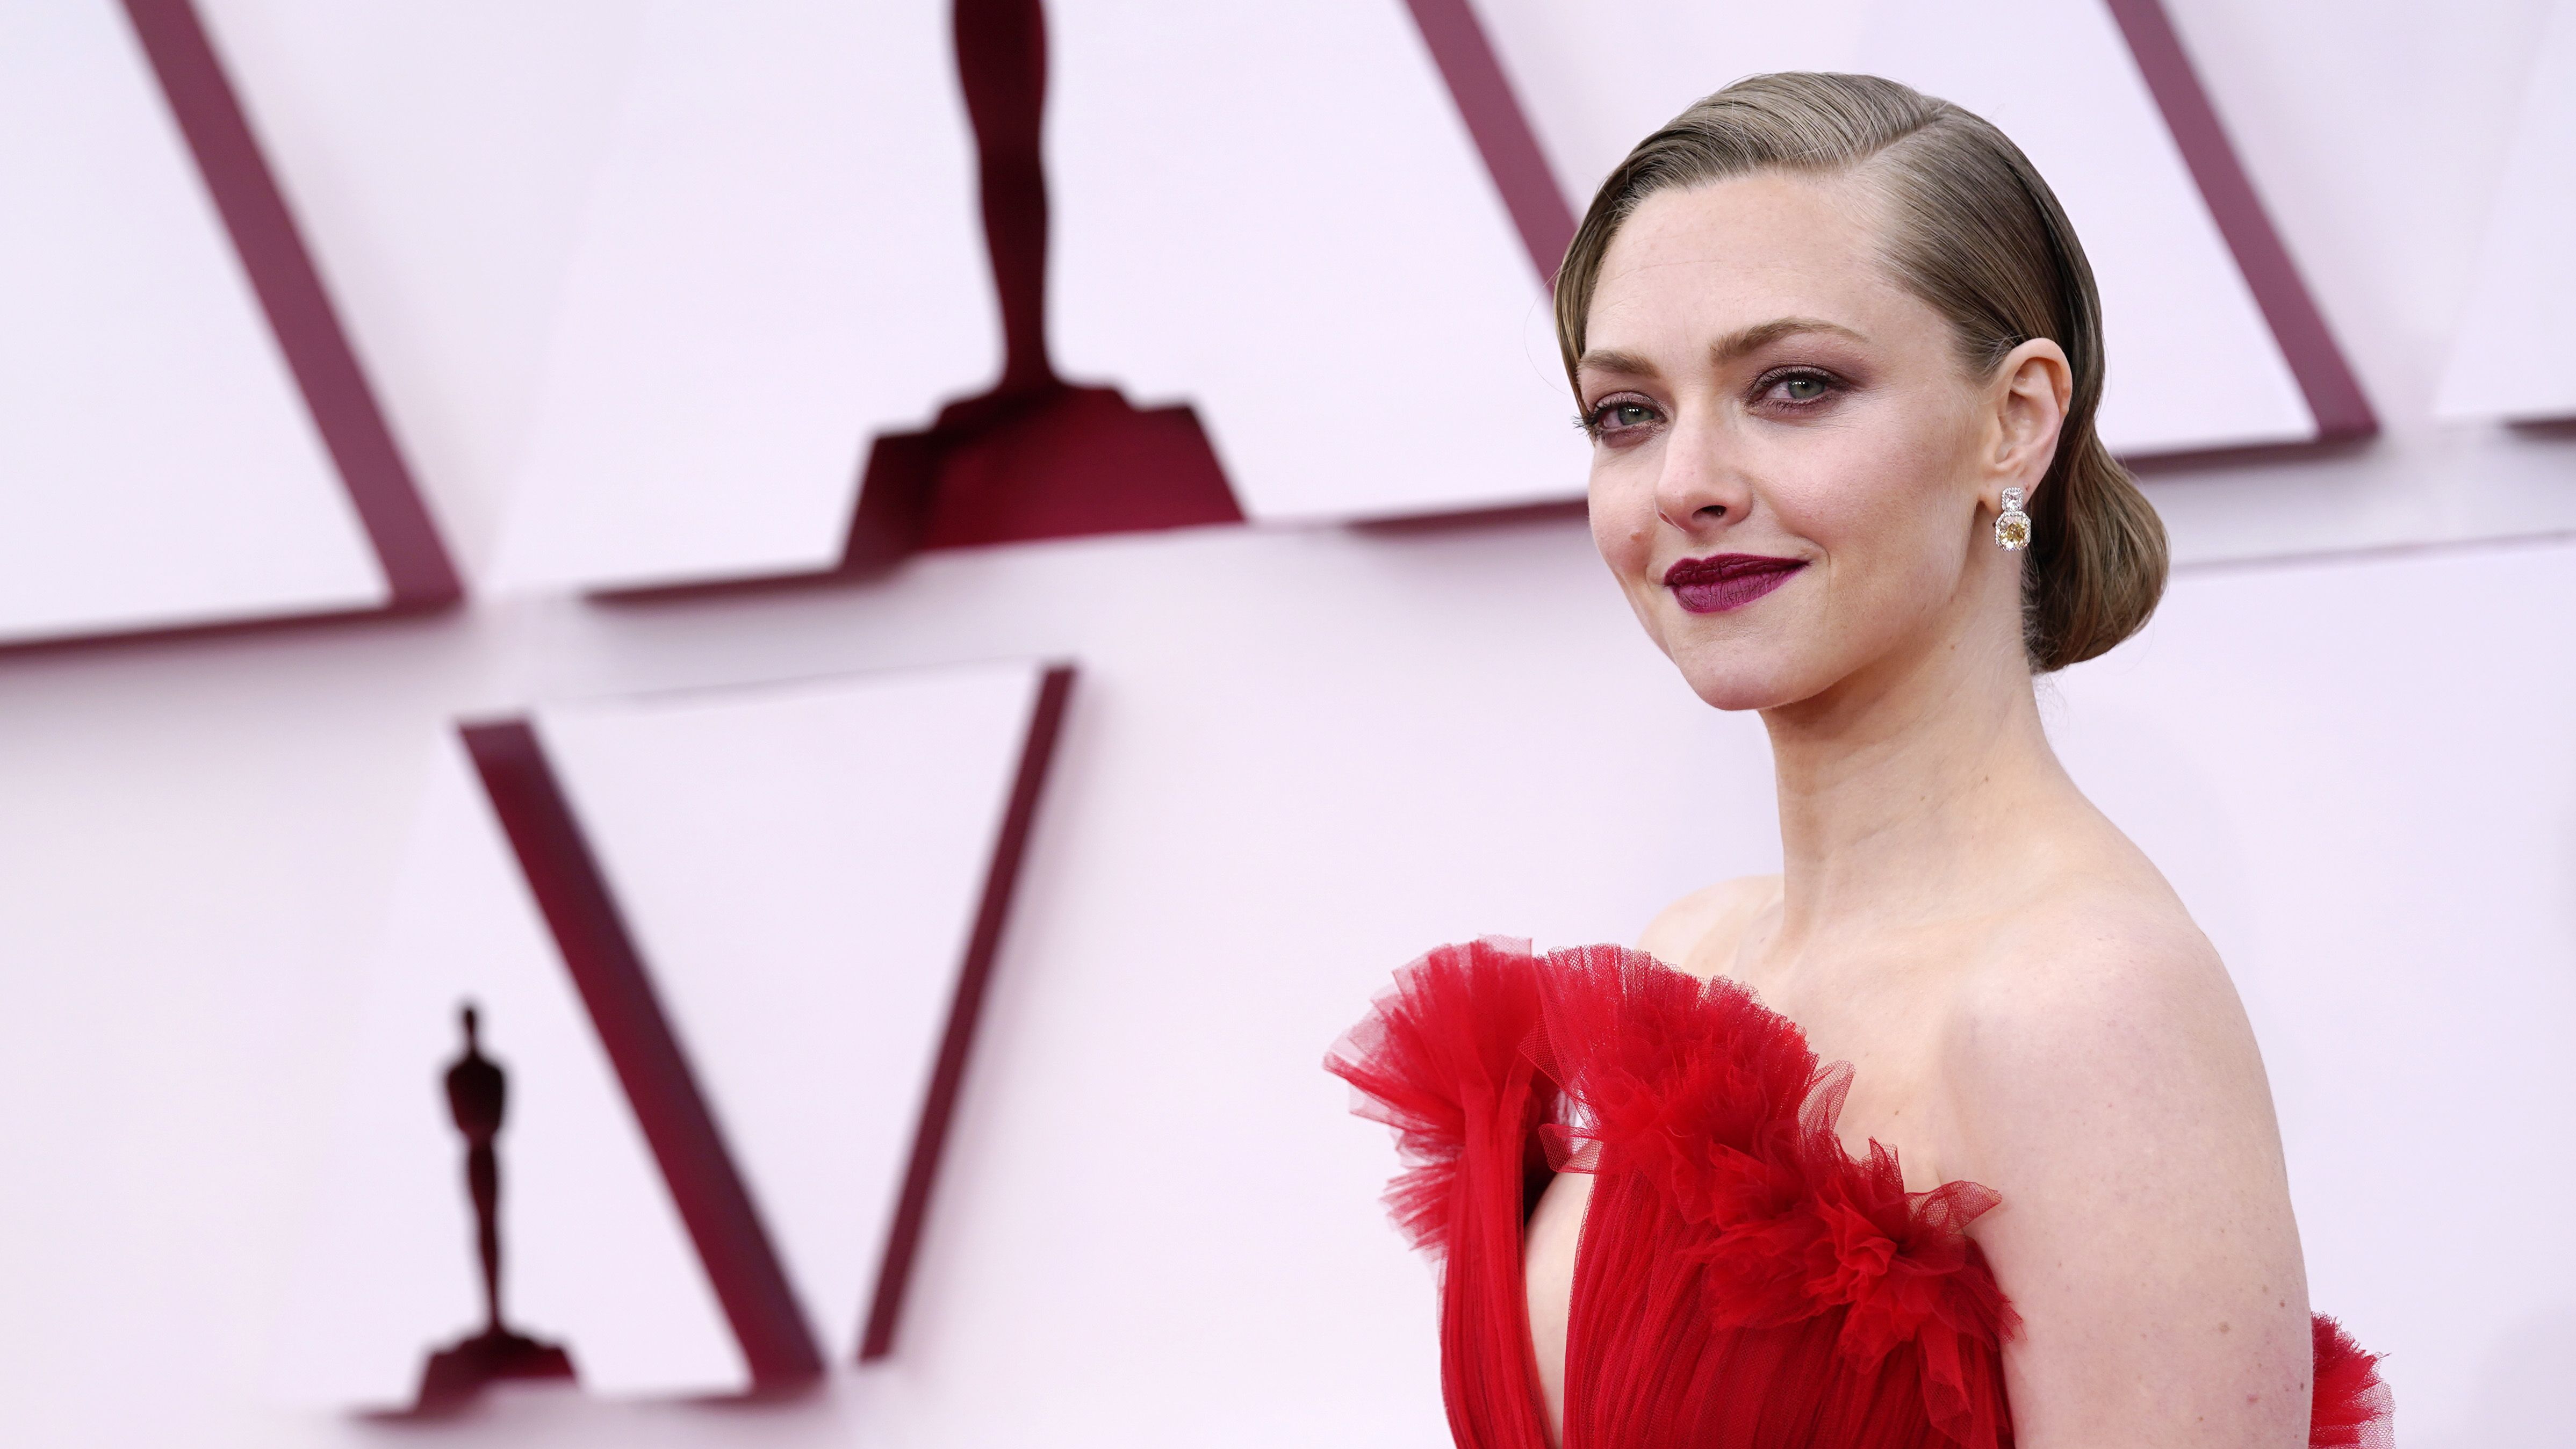 See Amanda Seyfried's 2021 Oscars Dress in Pictures